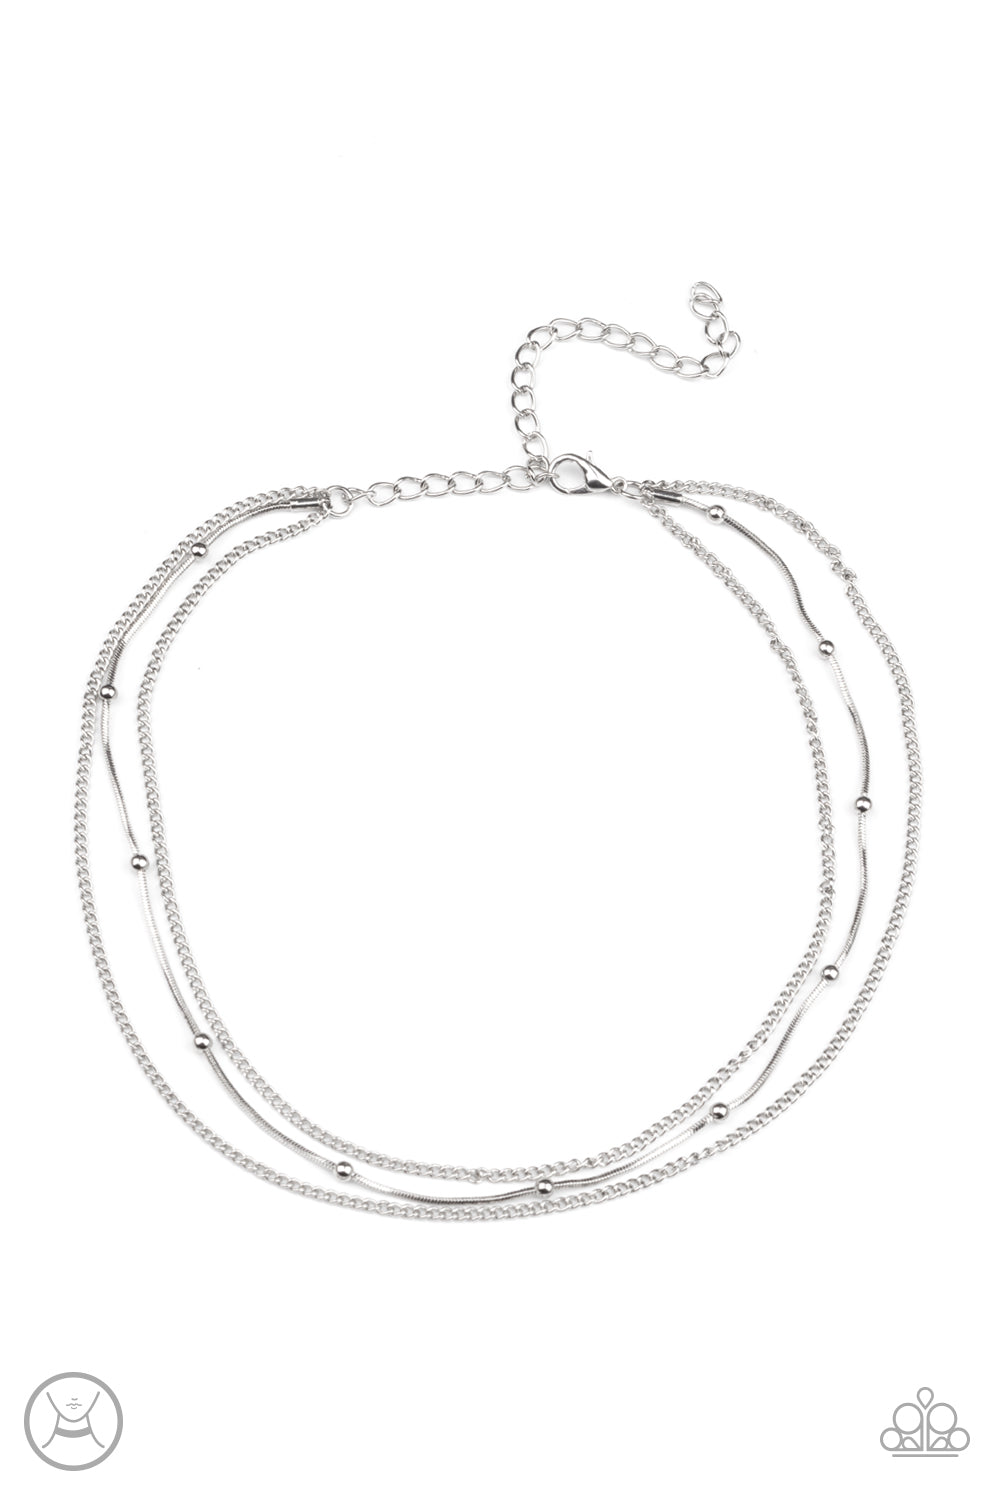 Subtly Stunning Silver Necklace